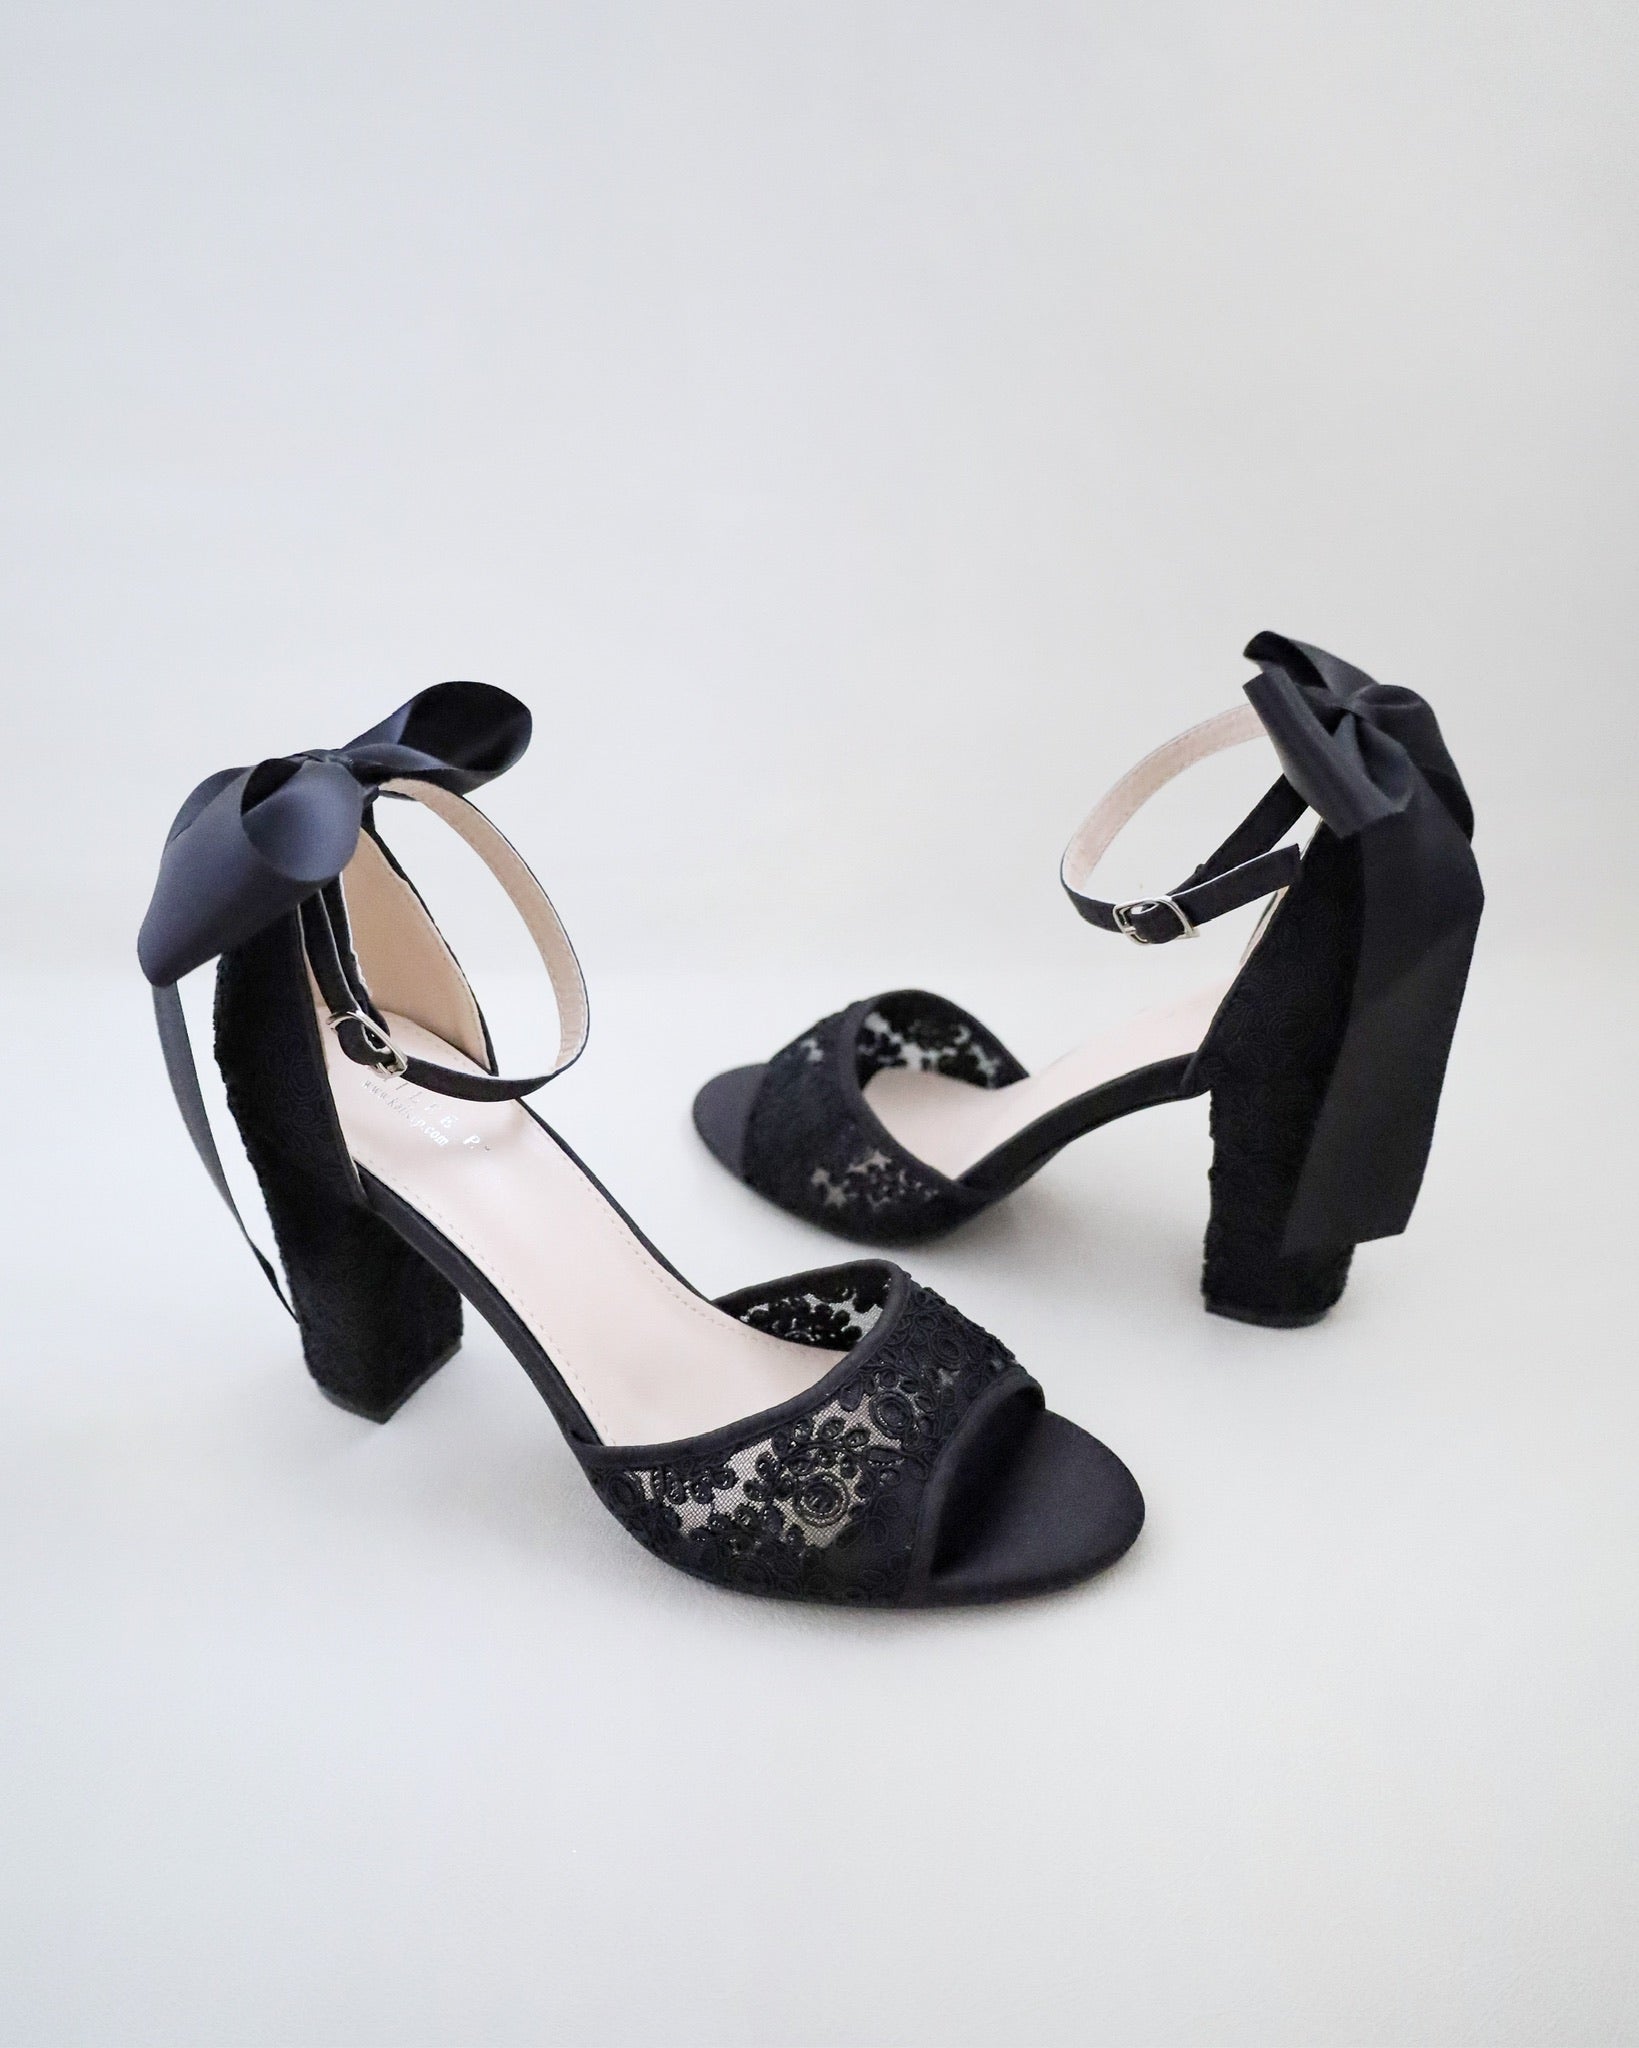 Black Crochet Lace Block Heel Evening Sandals with Satin Back Bow